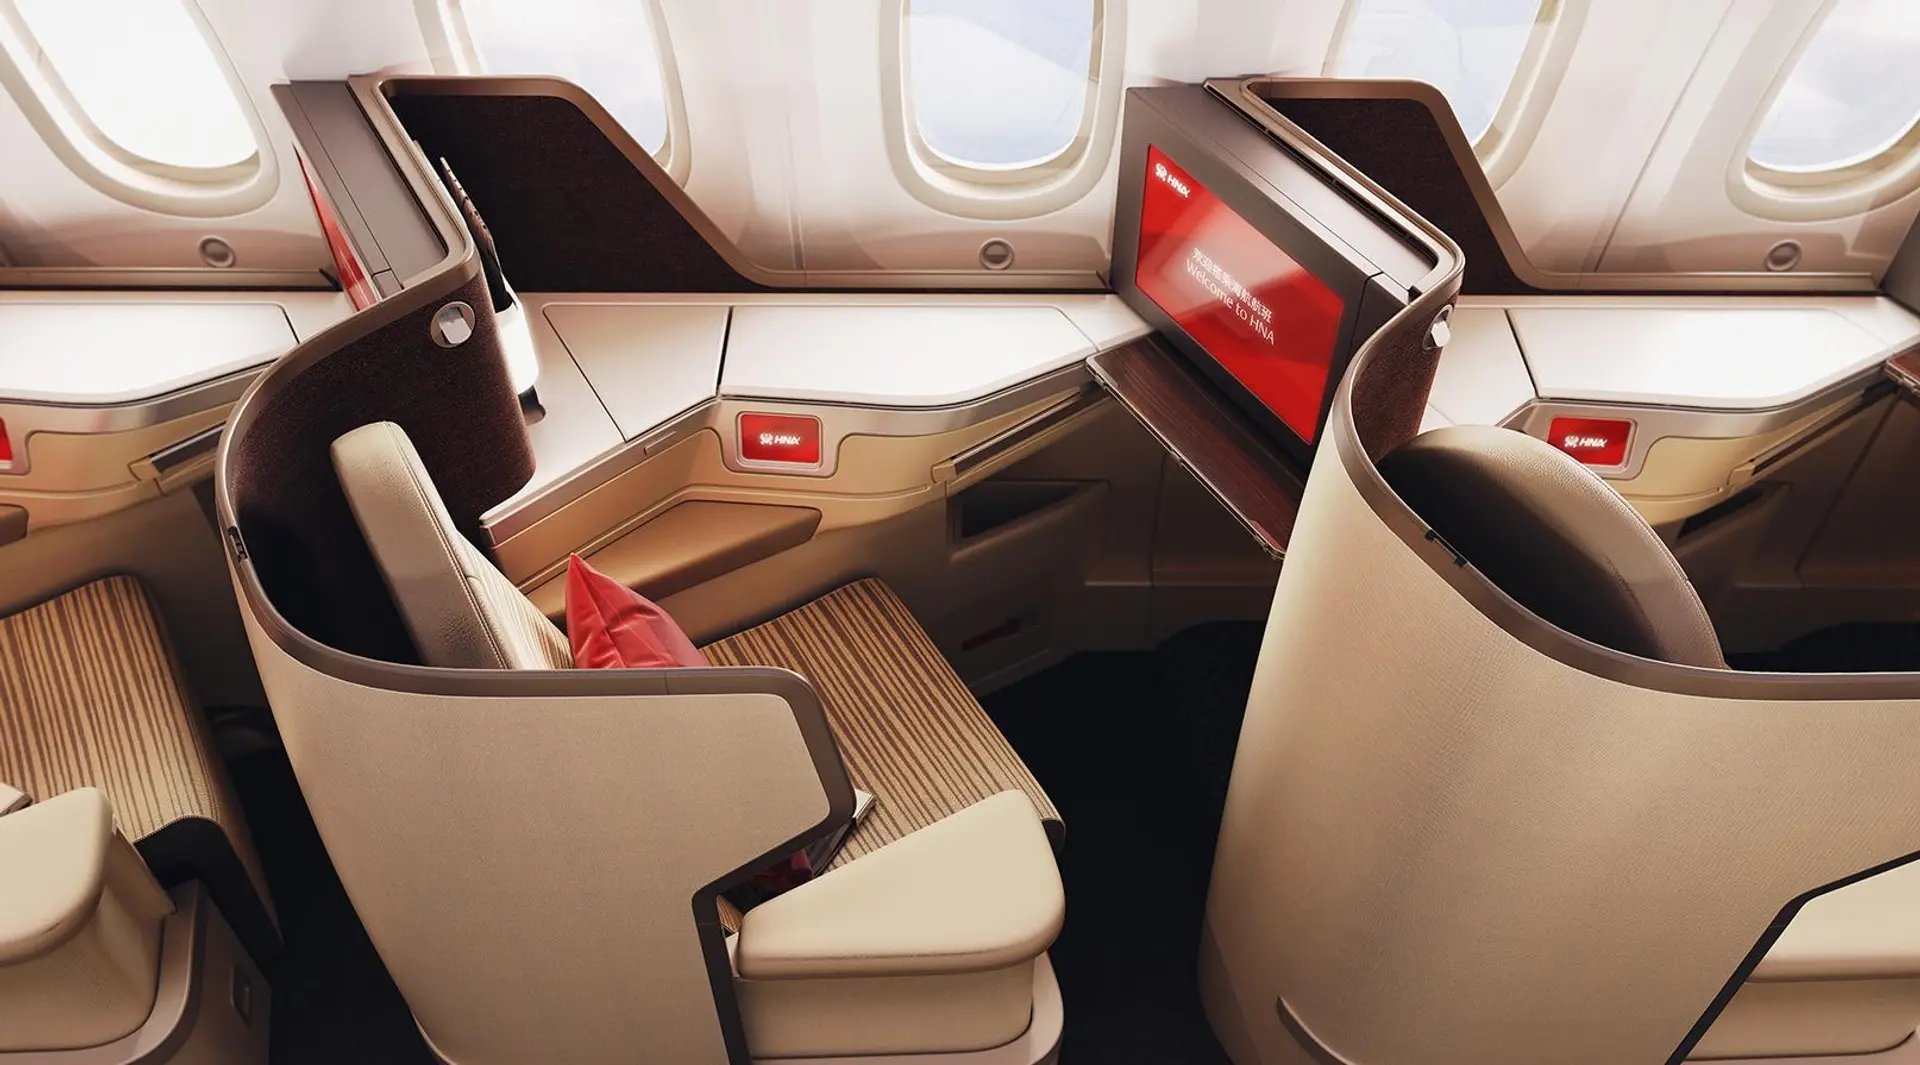 Airline review Cabin & Seat - Hainan Airlines - 3